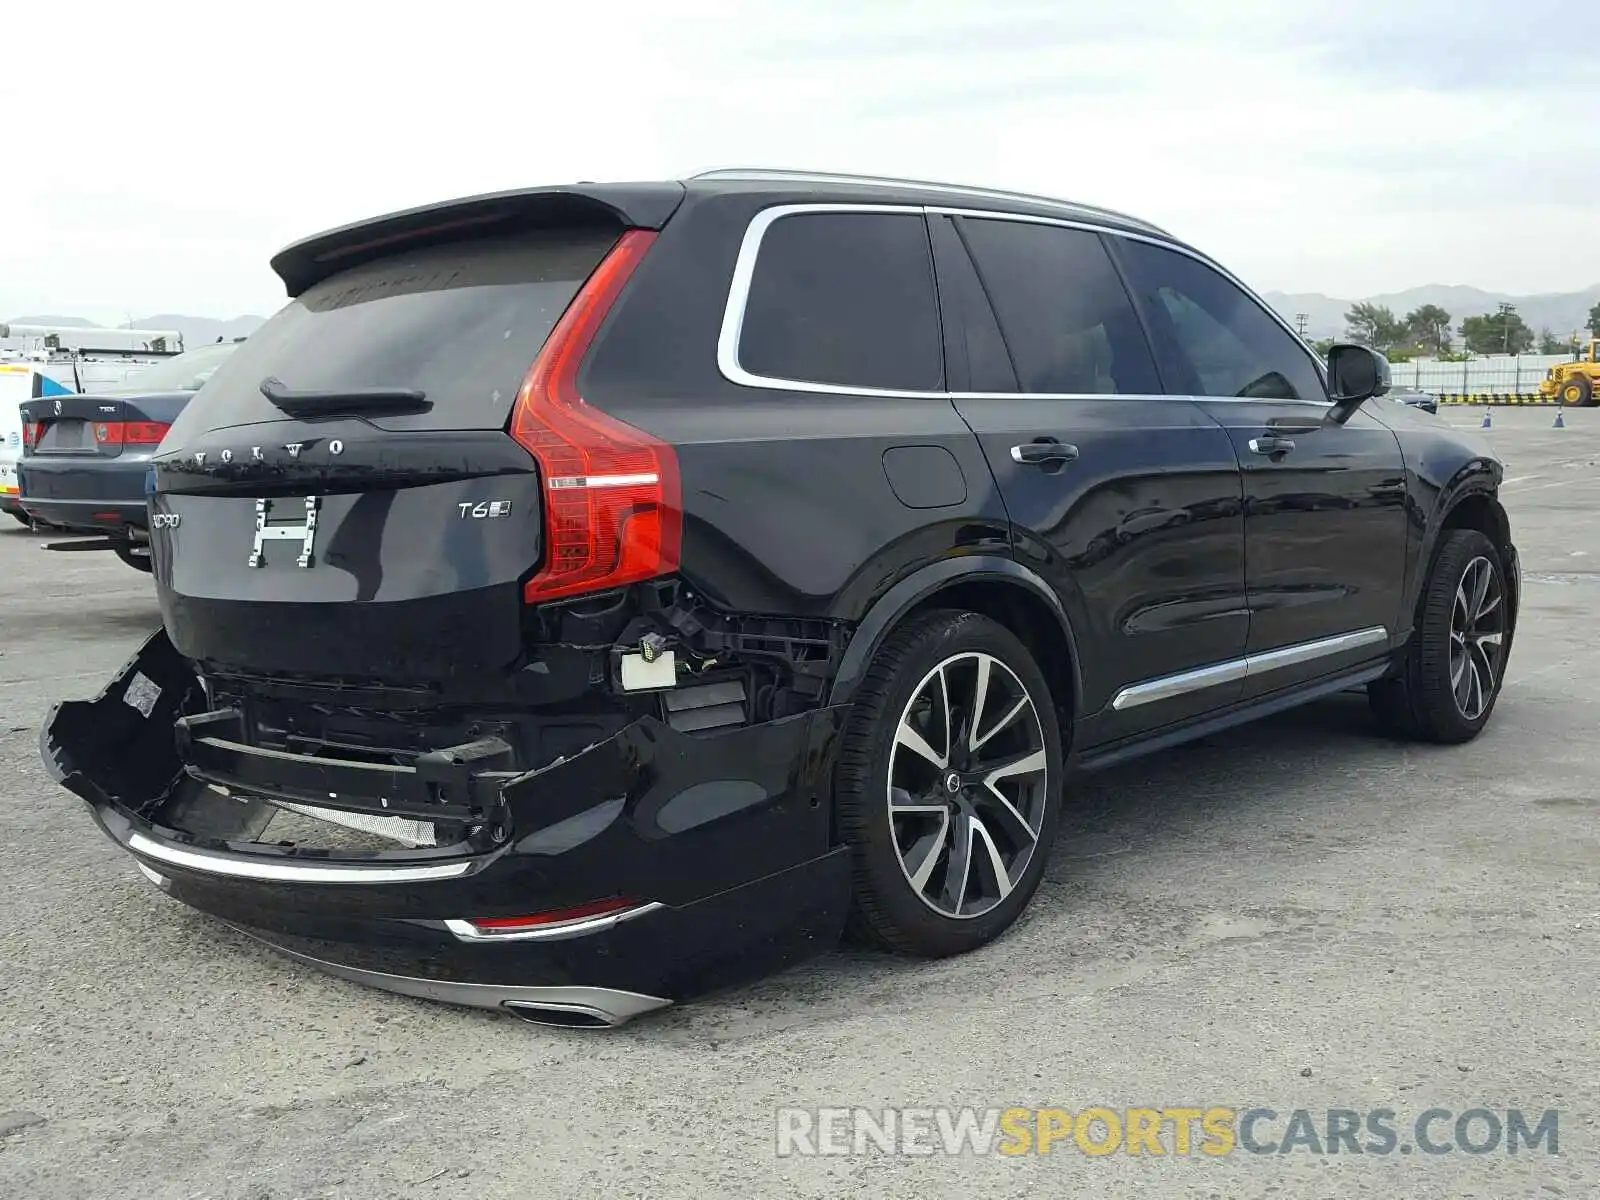 4 Photograph of a damaged car YV4A22PL8K1484343 VOLVO XC90 T6 IN 2019